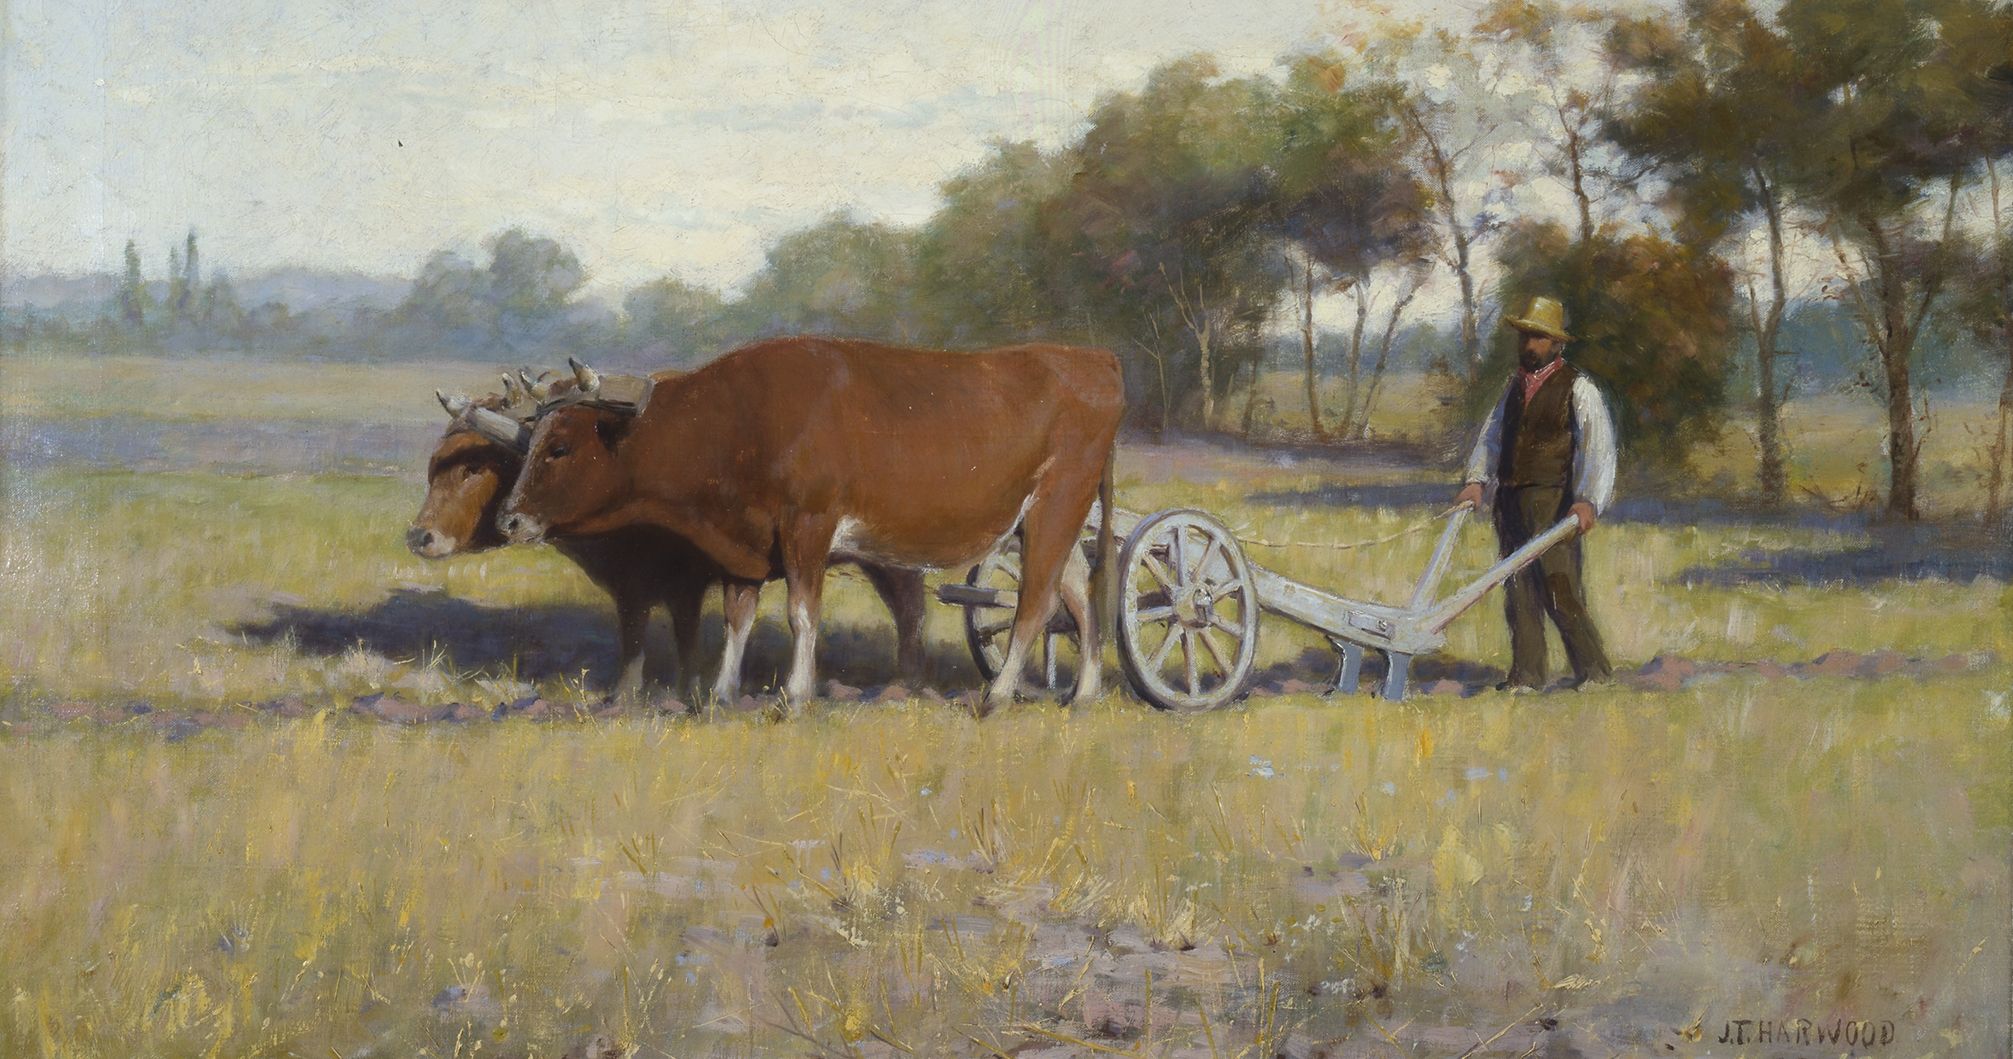 First Furrow, by James Taylor Harwood. Image via Church of Jesus Christ.